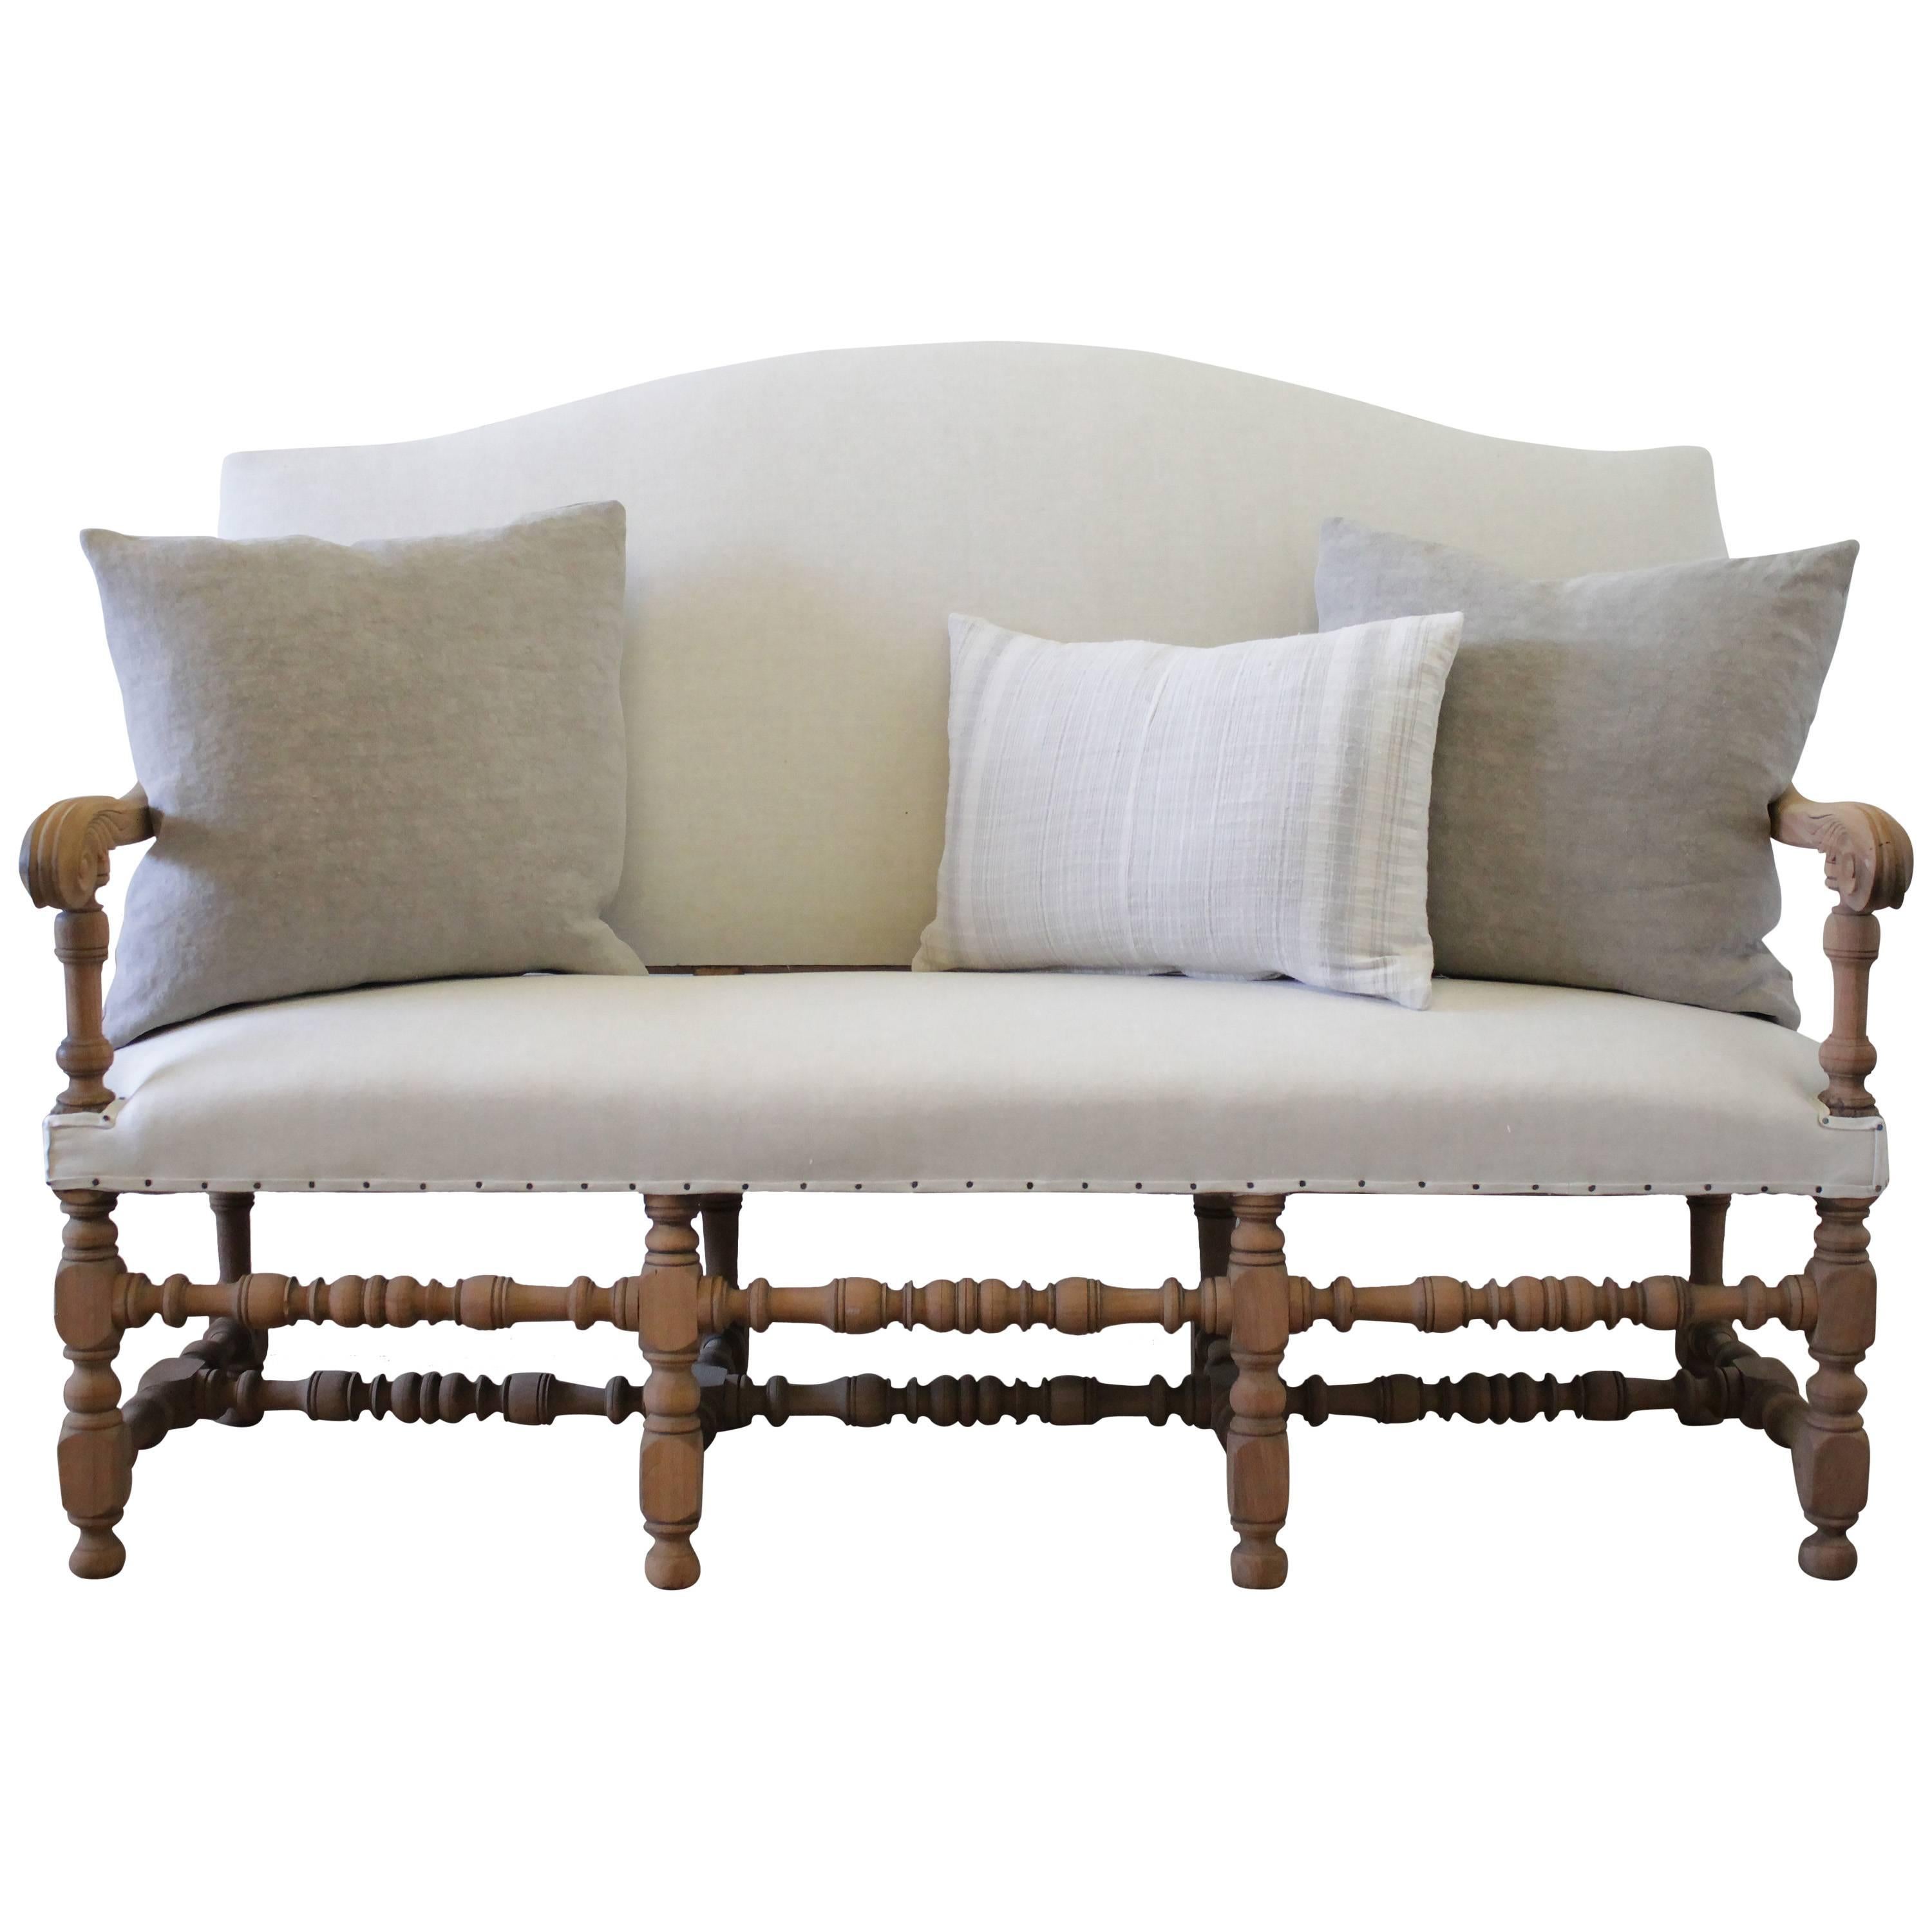 Antique Settee Bench Upholstered in Organic Natural Linen with Nail Trim